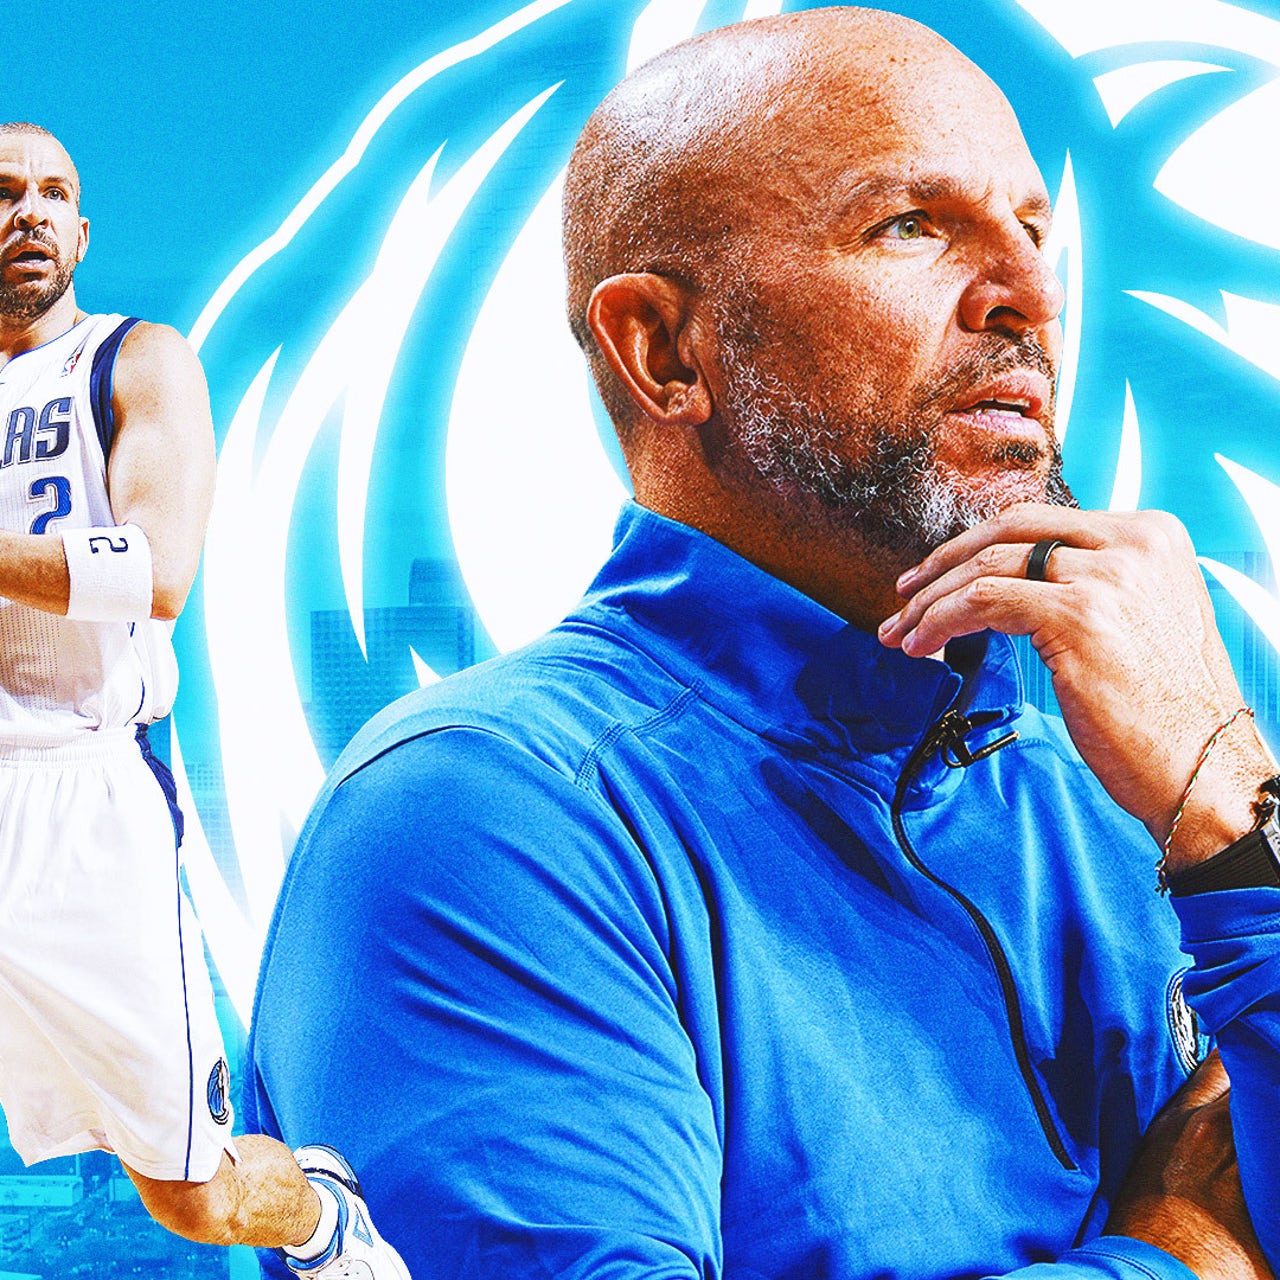 Nets to honor Jason Kidd with jersey retirement - Sports Illustrated